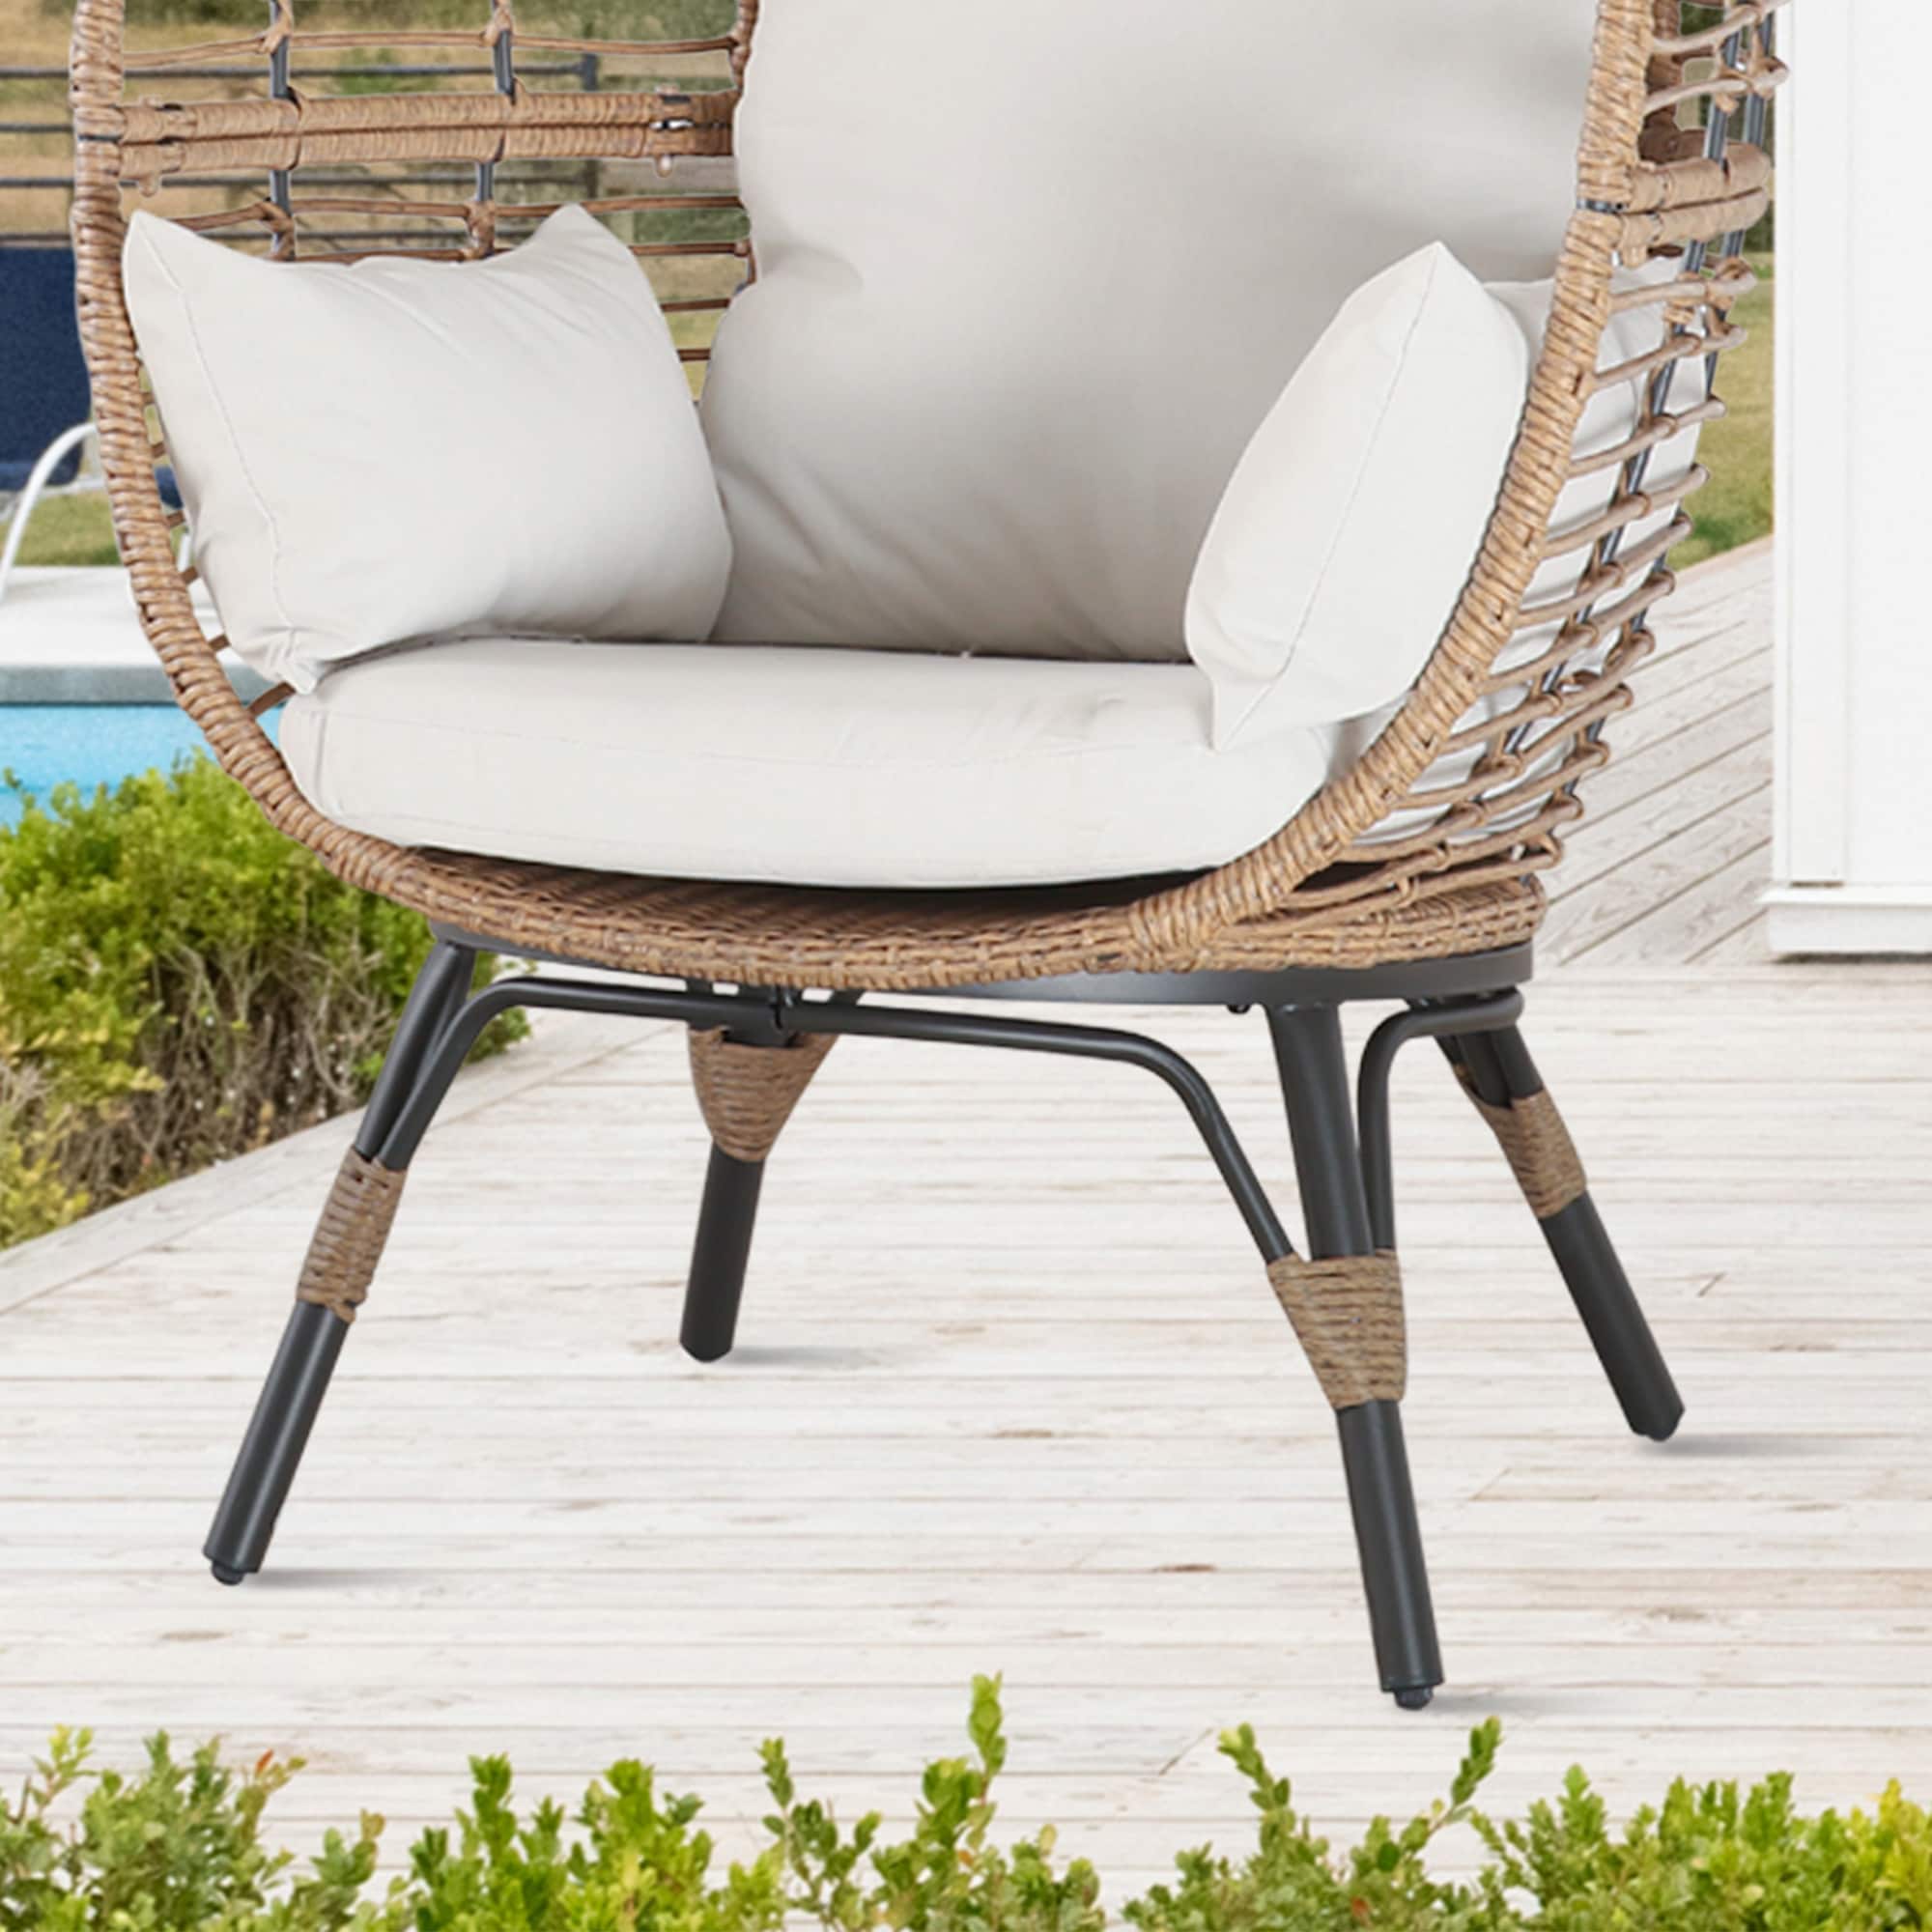 Egg Chair Outdoor Basket Chairs - 4 PC Wicker Patio Egg Cocoon Chairs Set  with 2 Chairs and 2 Ottomans Rattan Teardrop Cuddle Chair for Indoor  Bedroom